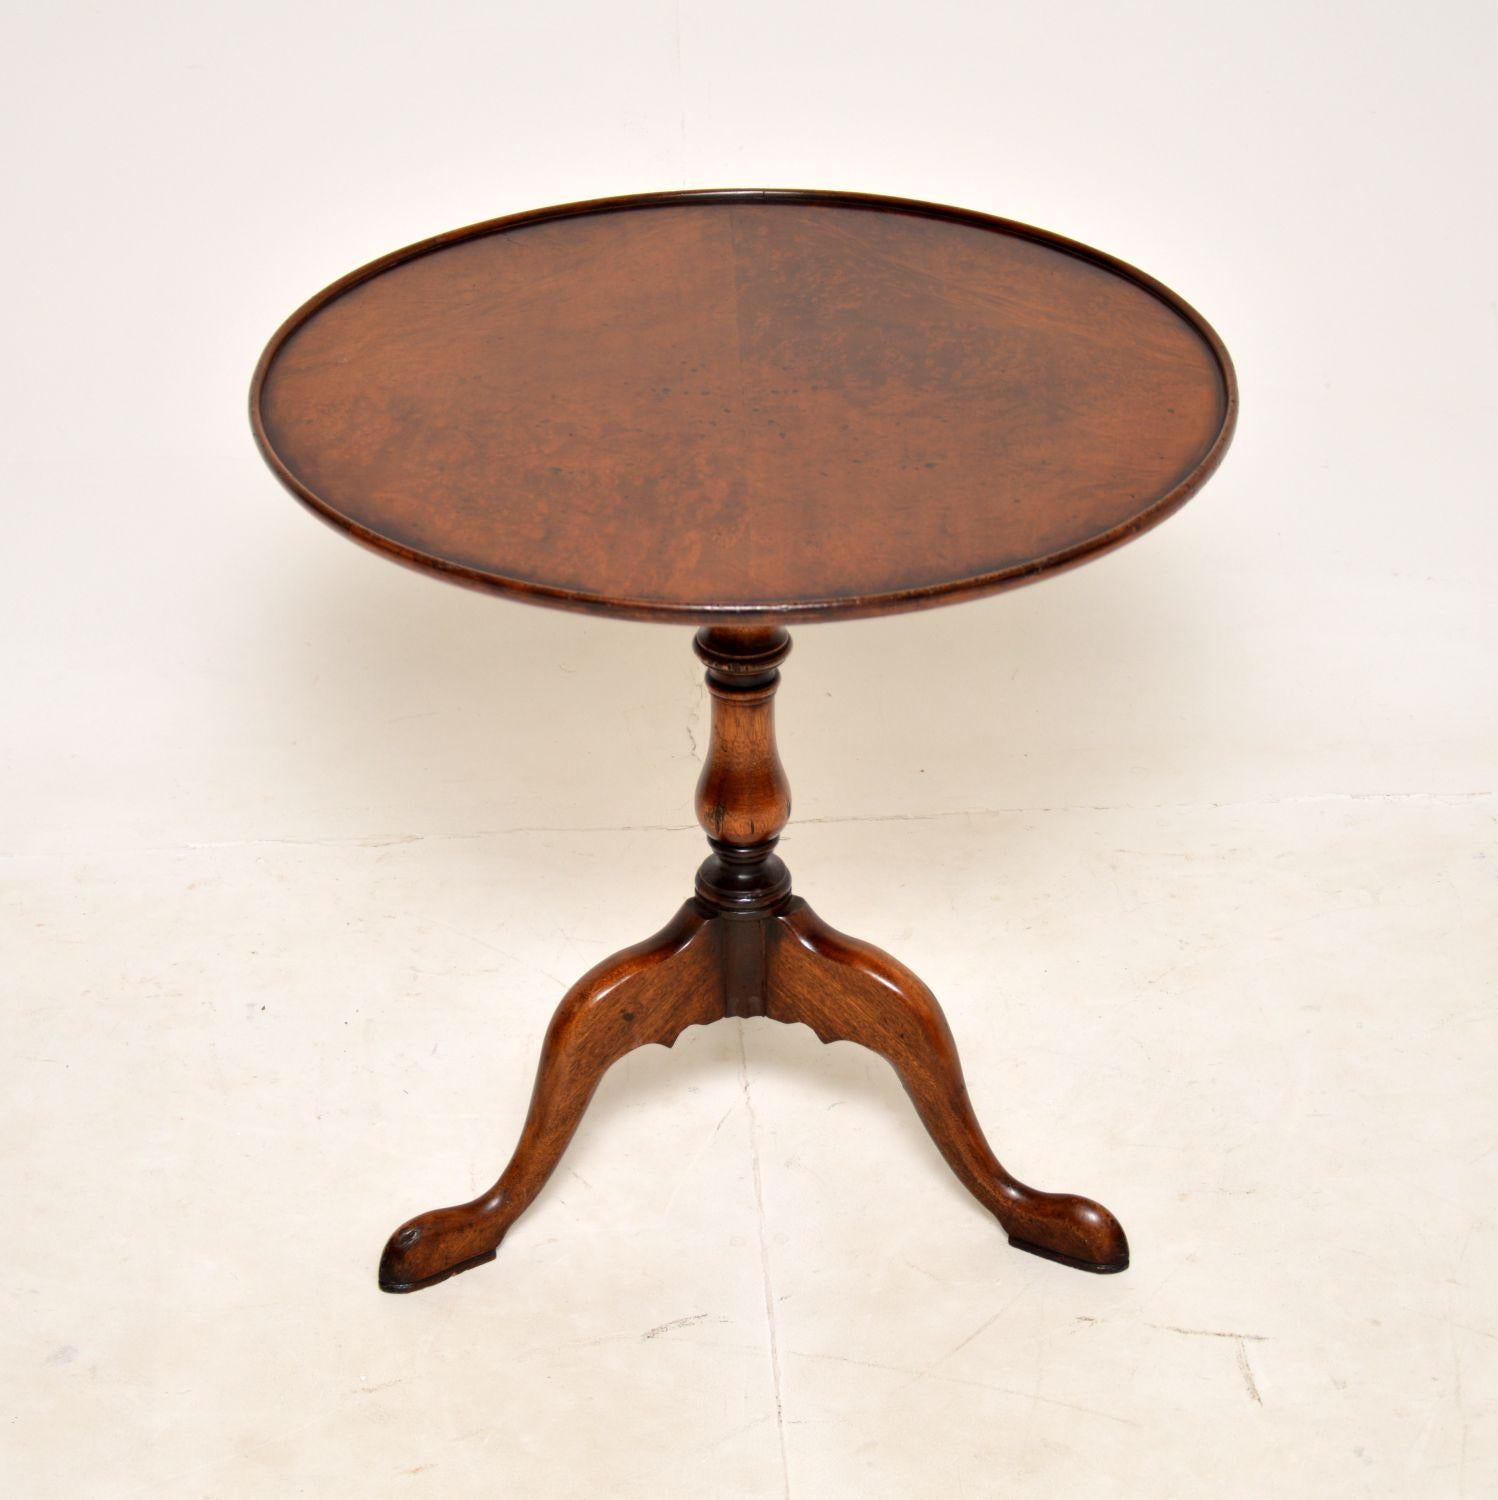 A lovely antique walnut occasional table in the Georgian style. This was made in England, it dates from around the 1930’s.

The quality is excellent and this is a very useful size. The burr walnut revolving top can tilt upwards to save space when